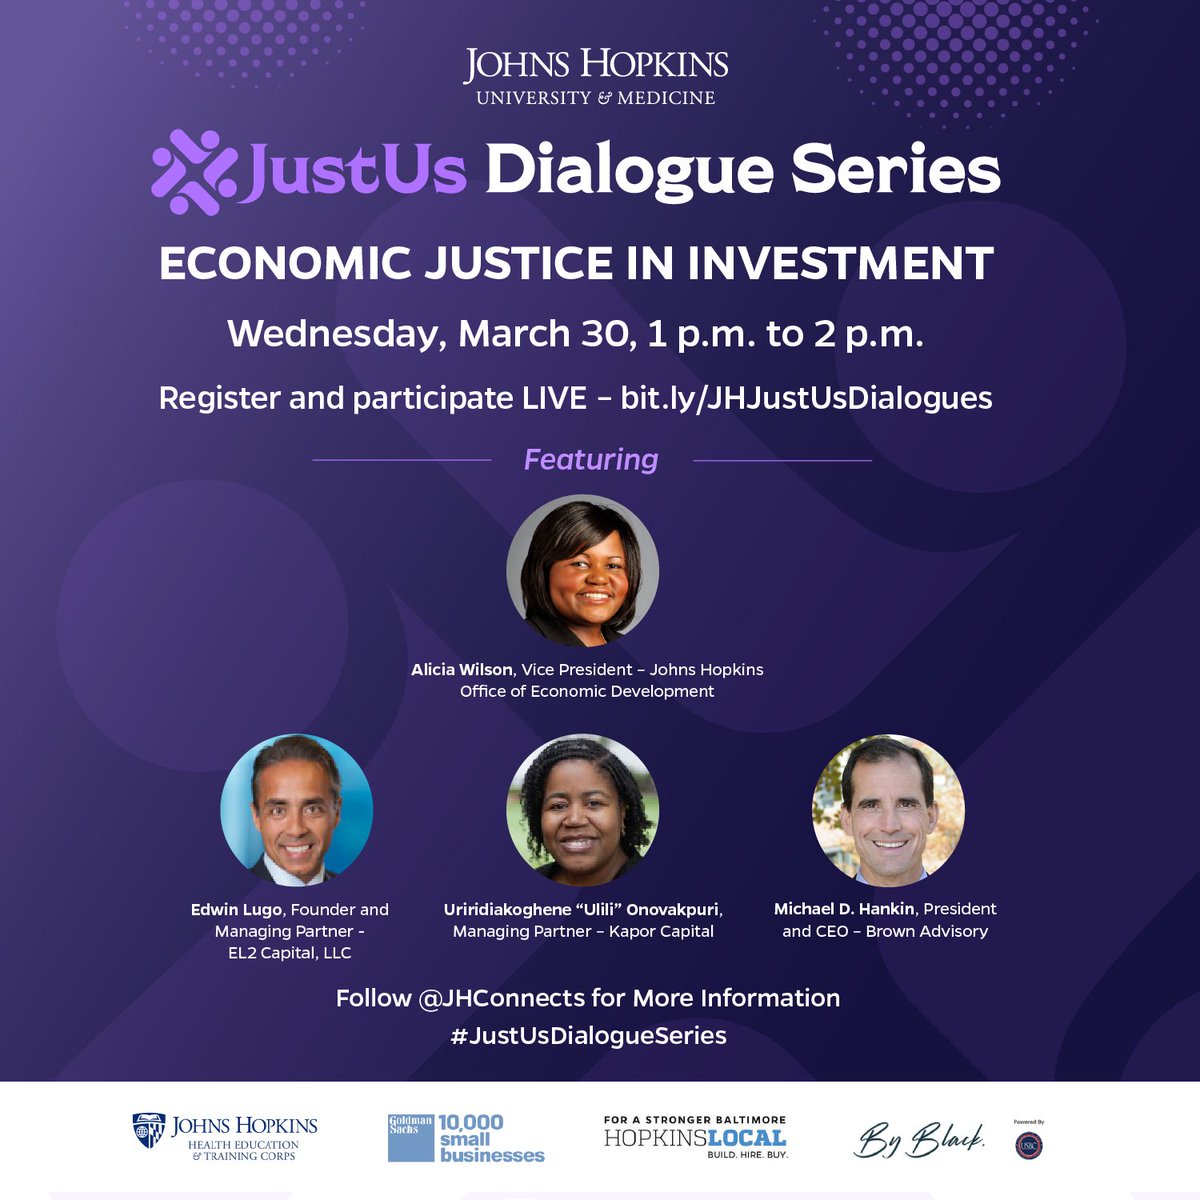 Live on the JustUs Main Stage, Wed., March 30, discussing Economic Justice in Investment. 

•  Alicia Wilson (@ALWilsonBmore) – Moderator
•  Edwin Lugo 
•  Michael D. Hankin (@BrownAdvisory) 
•  Uriridiakoghene “Ulili” Onovakpuri (@unolil) 

Info! bit.ly/JHJustUsDialog…